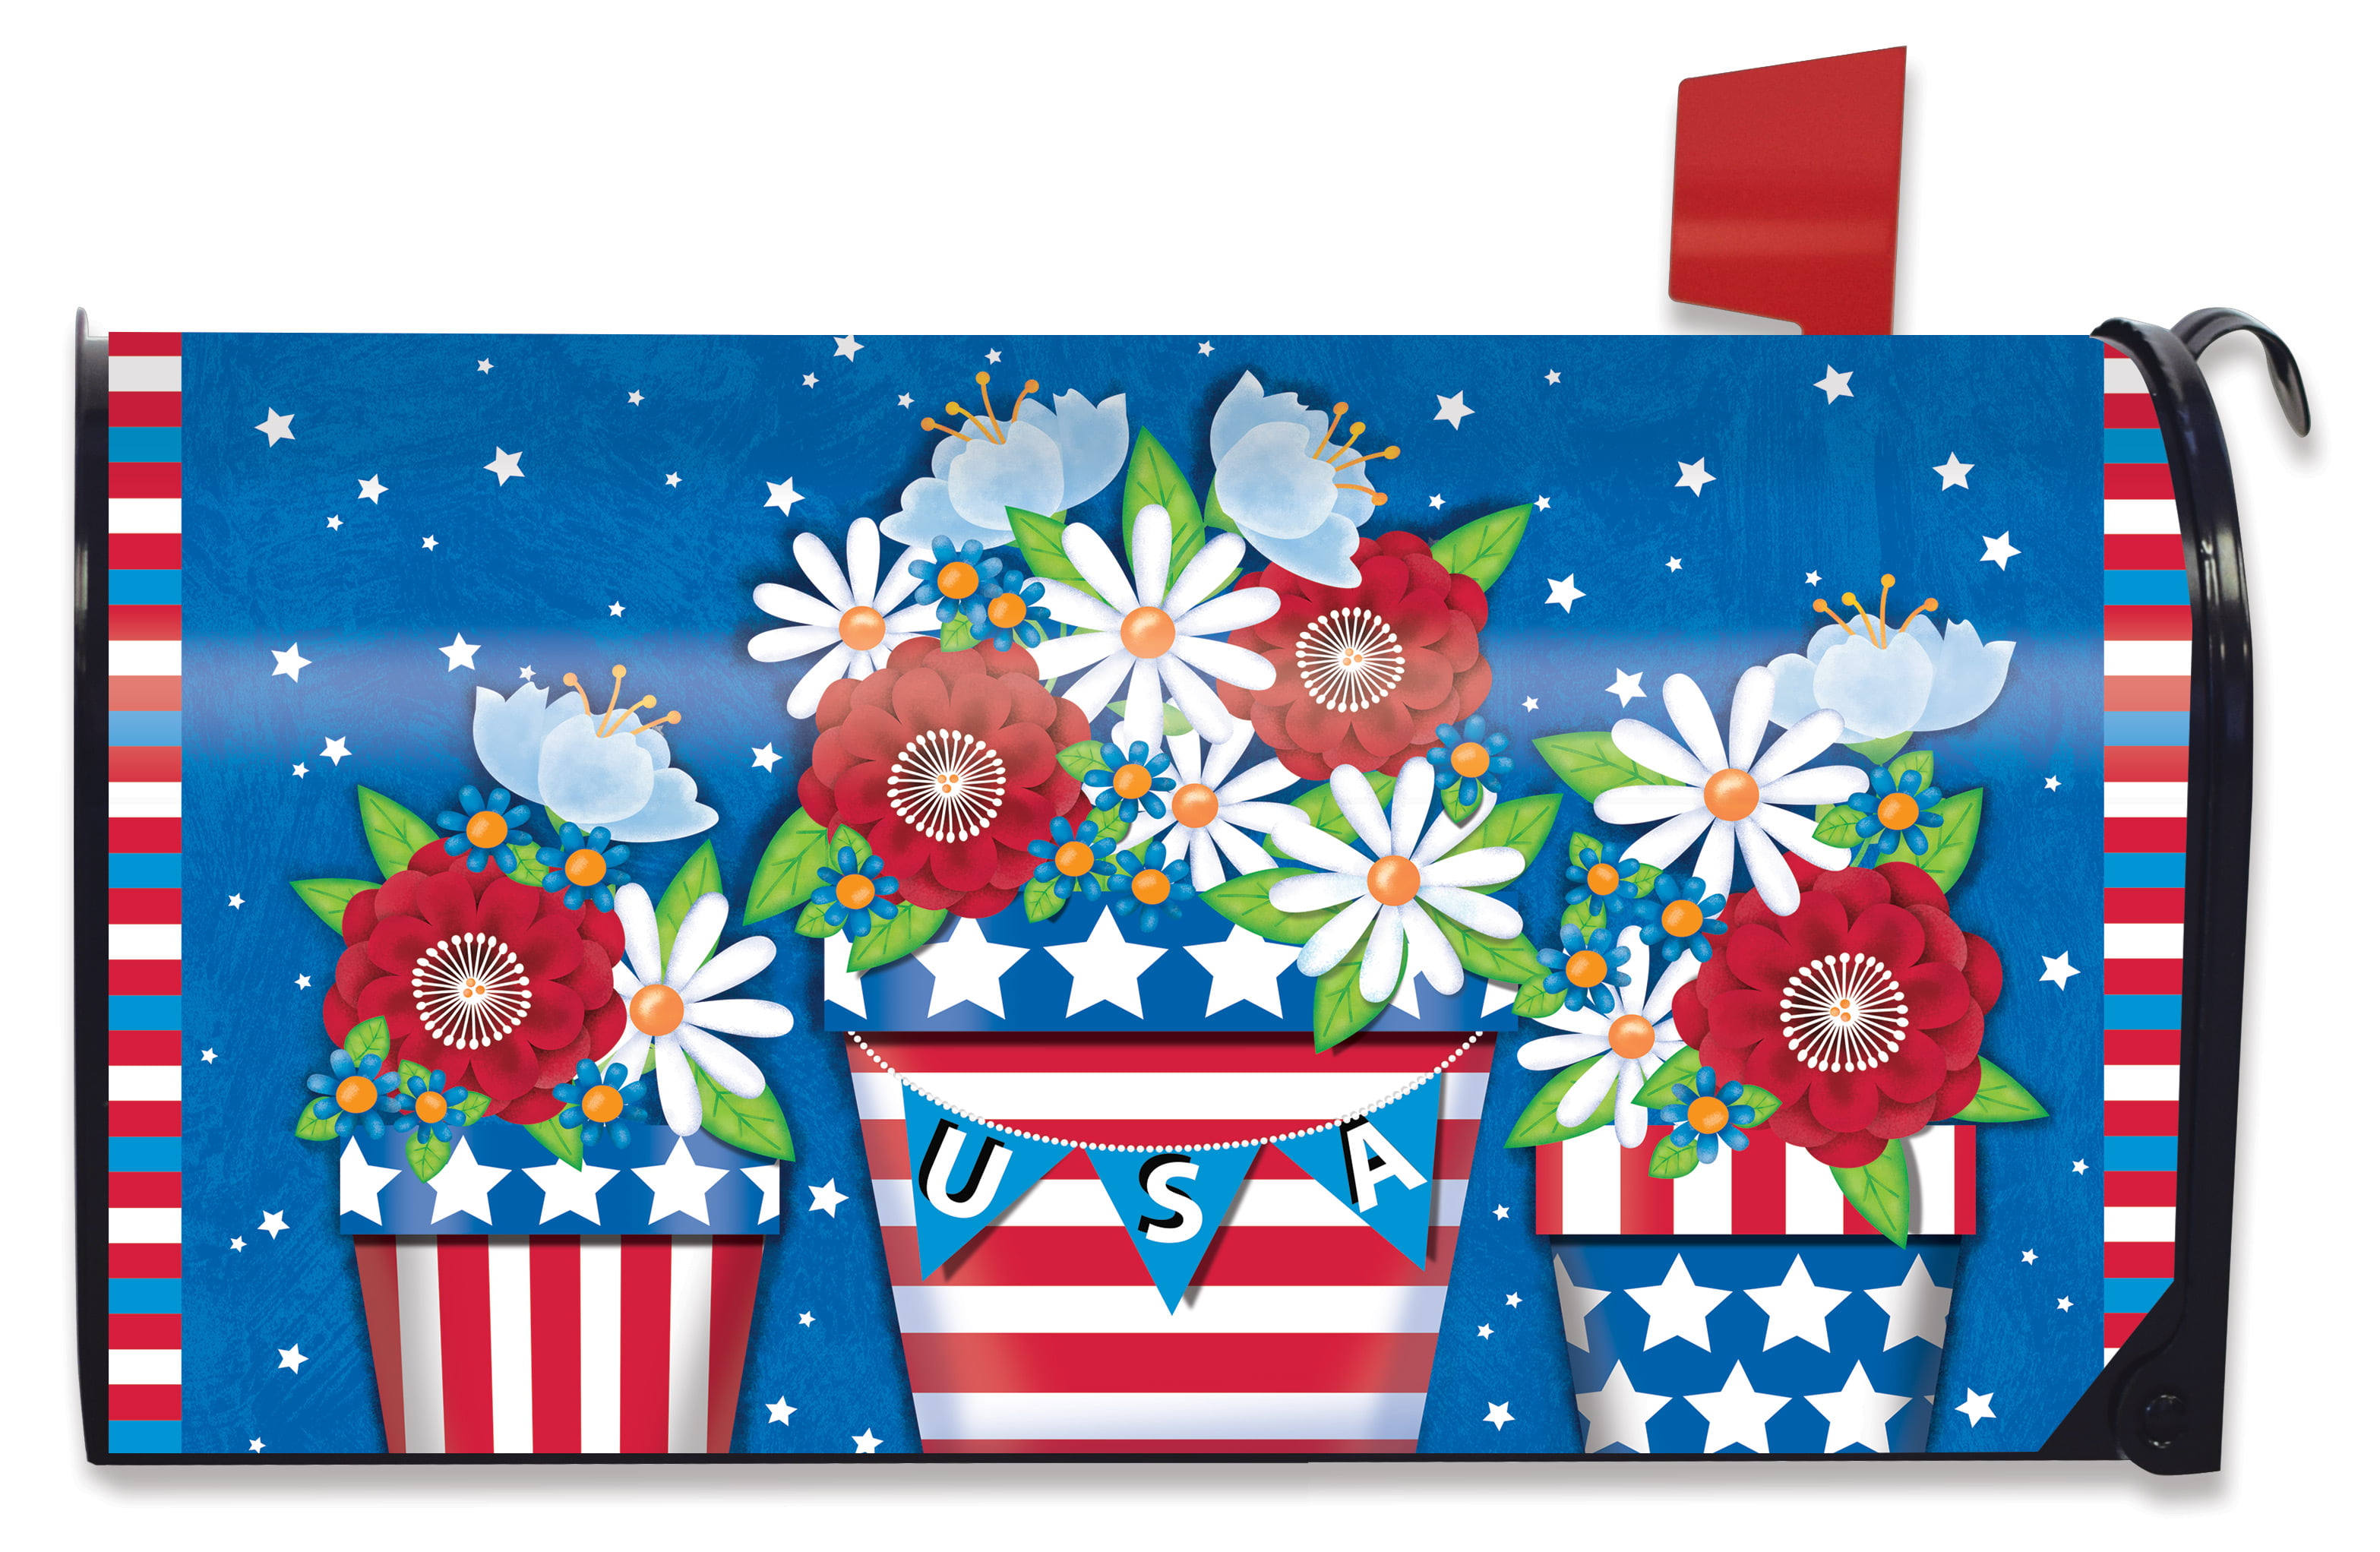 Blue and White Flowers Vinyl Magnetic Mailbox Cover Made in the USA